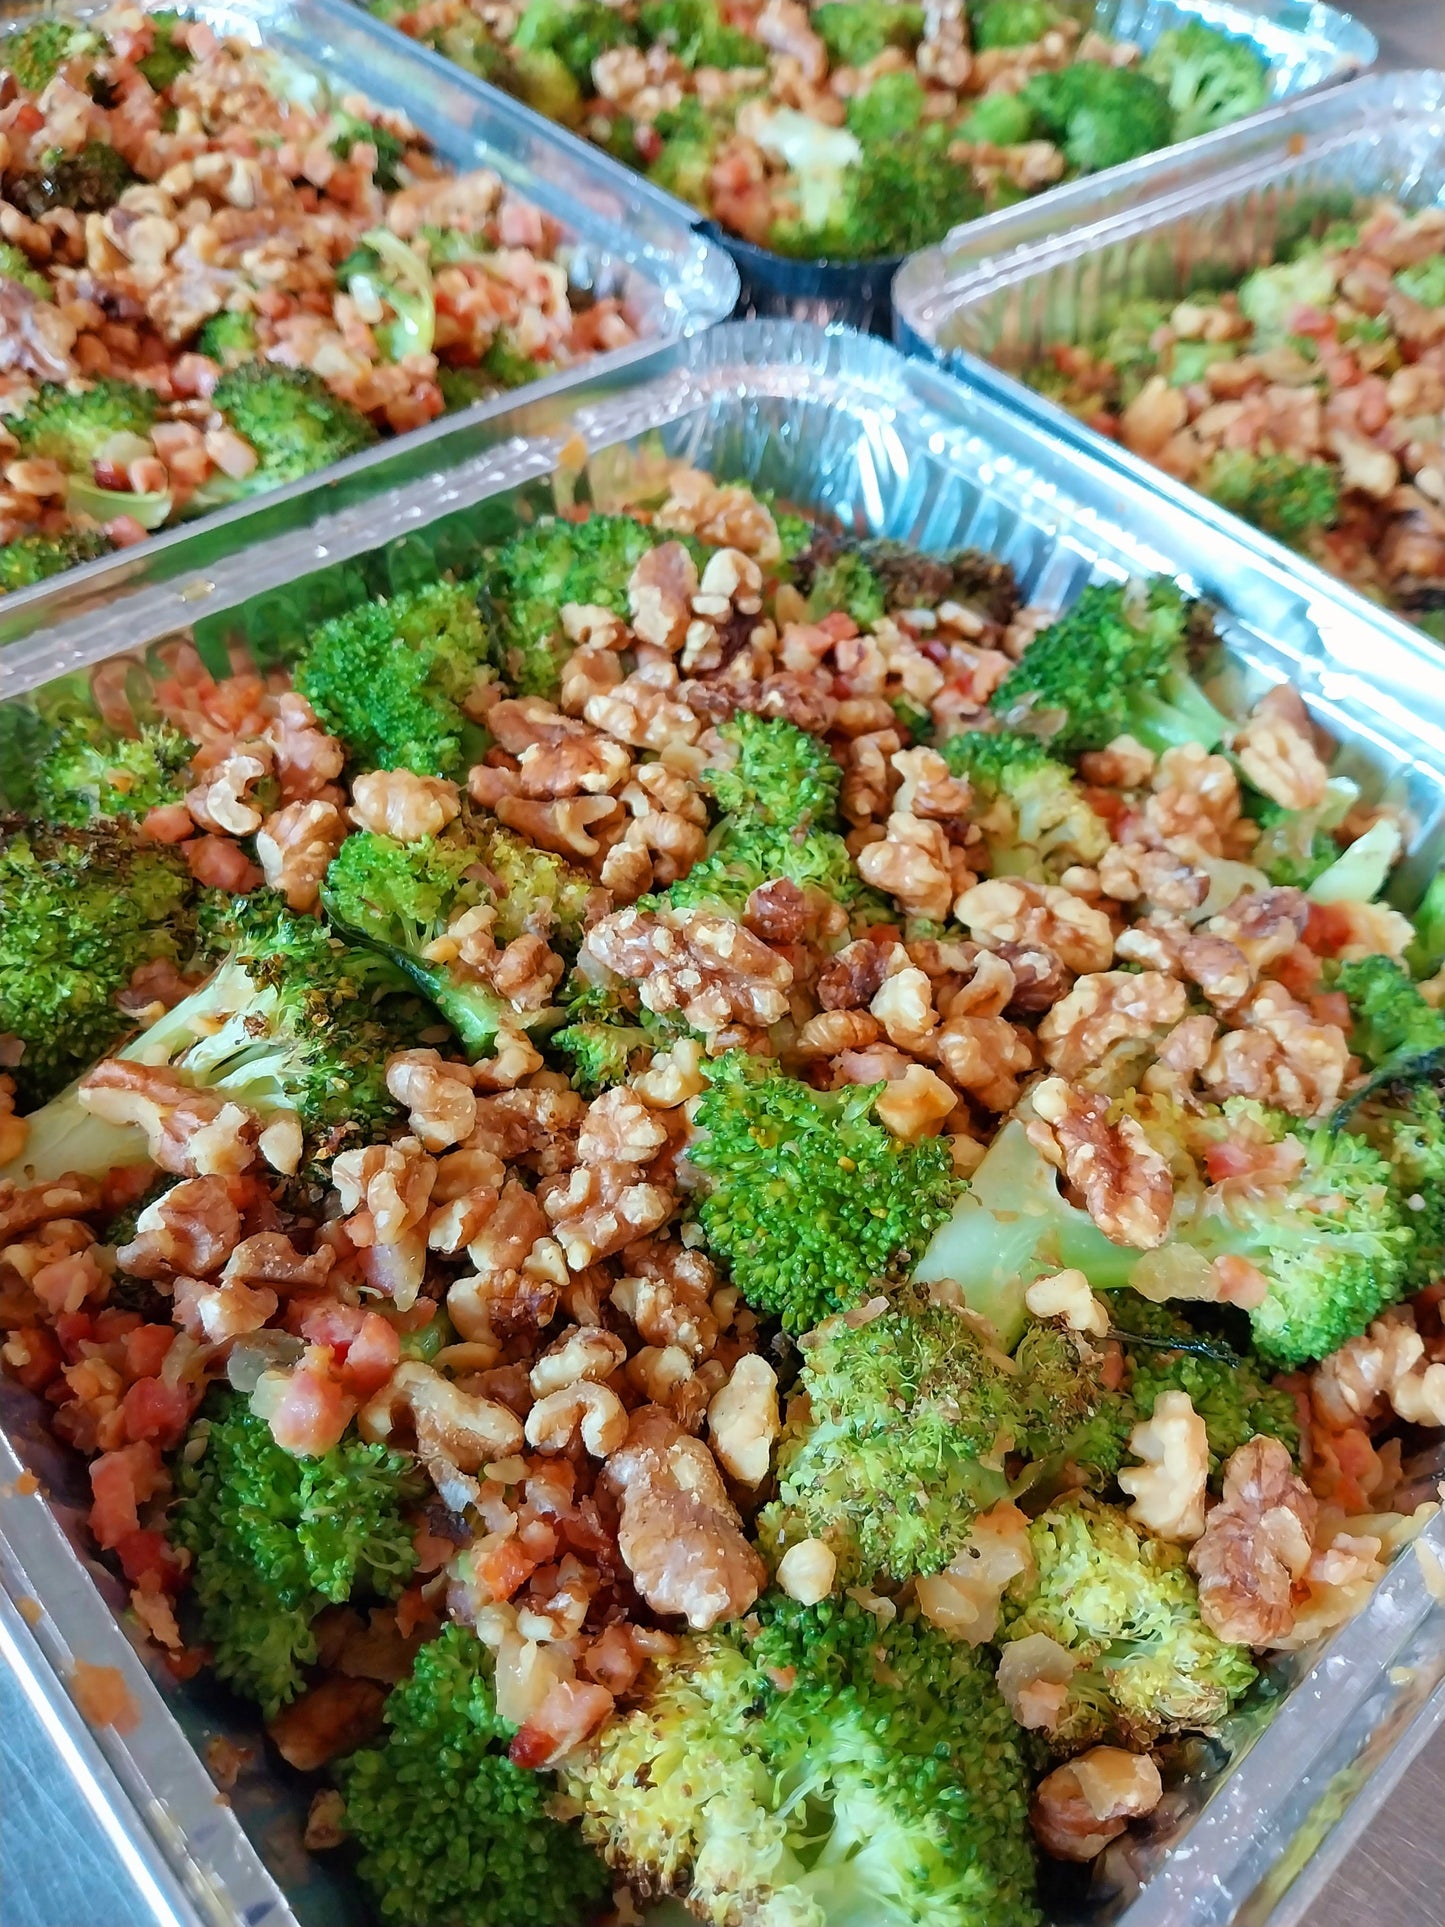 Roasted Broccoli with Bacon & Walnuts 750gms